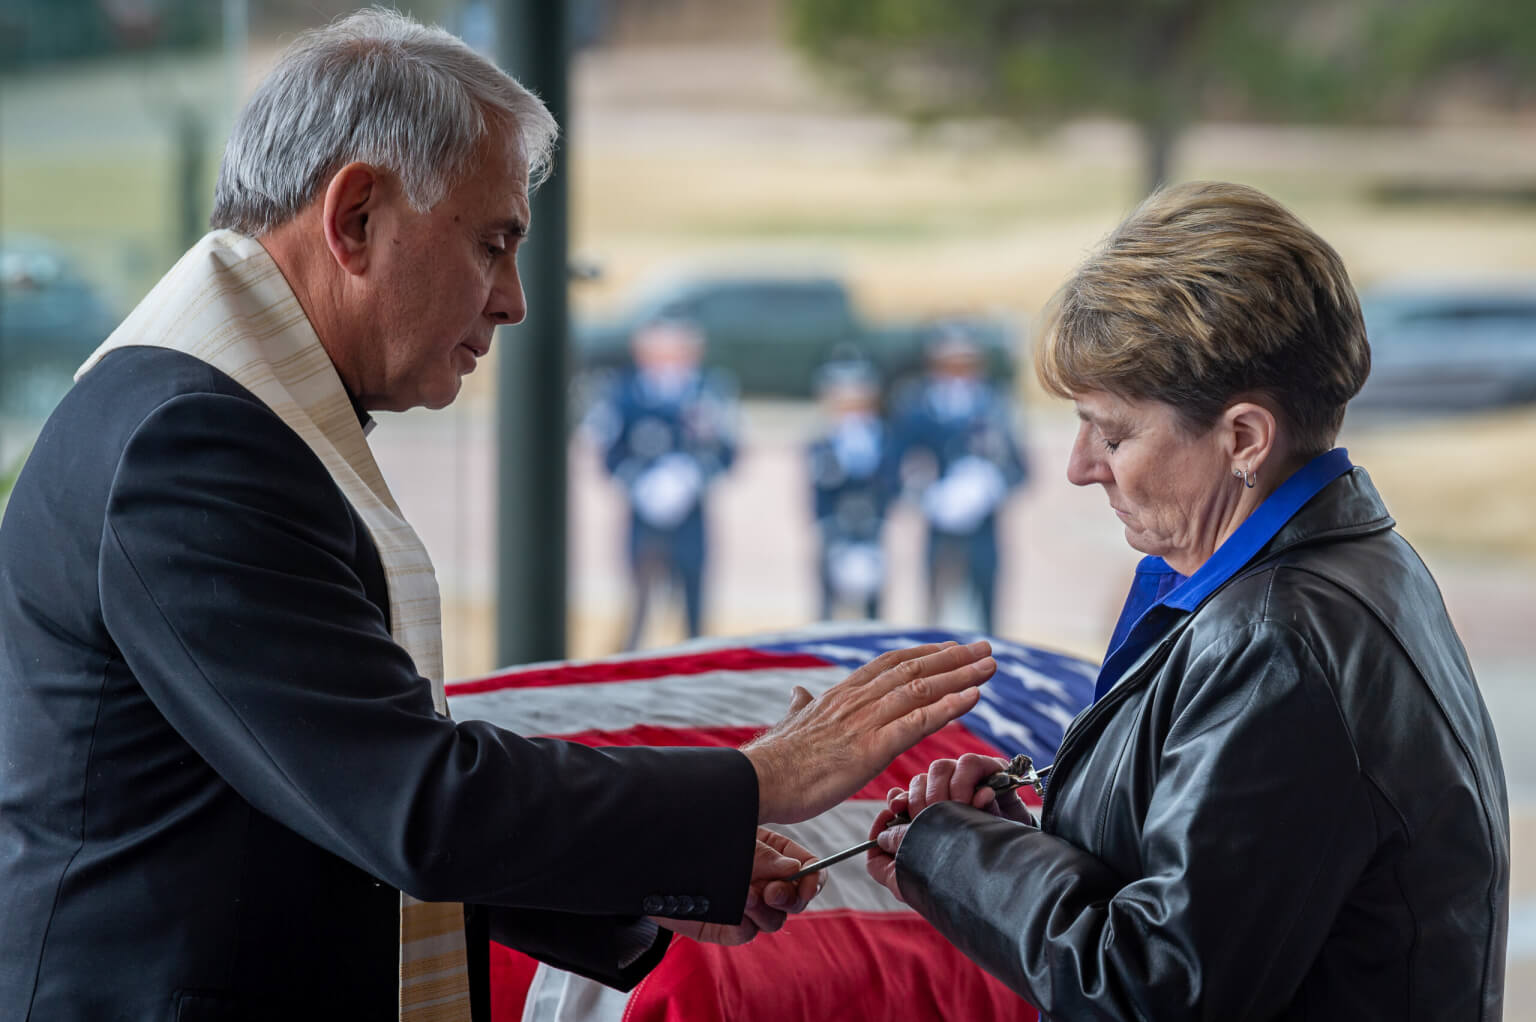 Father Robert Bruno, a retired colonel and former U.S. Air Force Academy command chaplain, blesses a cross held by Kay Scott, daughter of Lt. Gen. Winfield W. “Skip” Scott Jr.